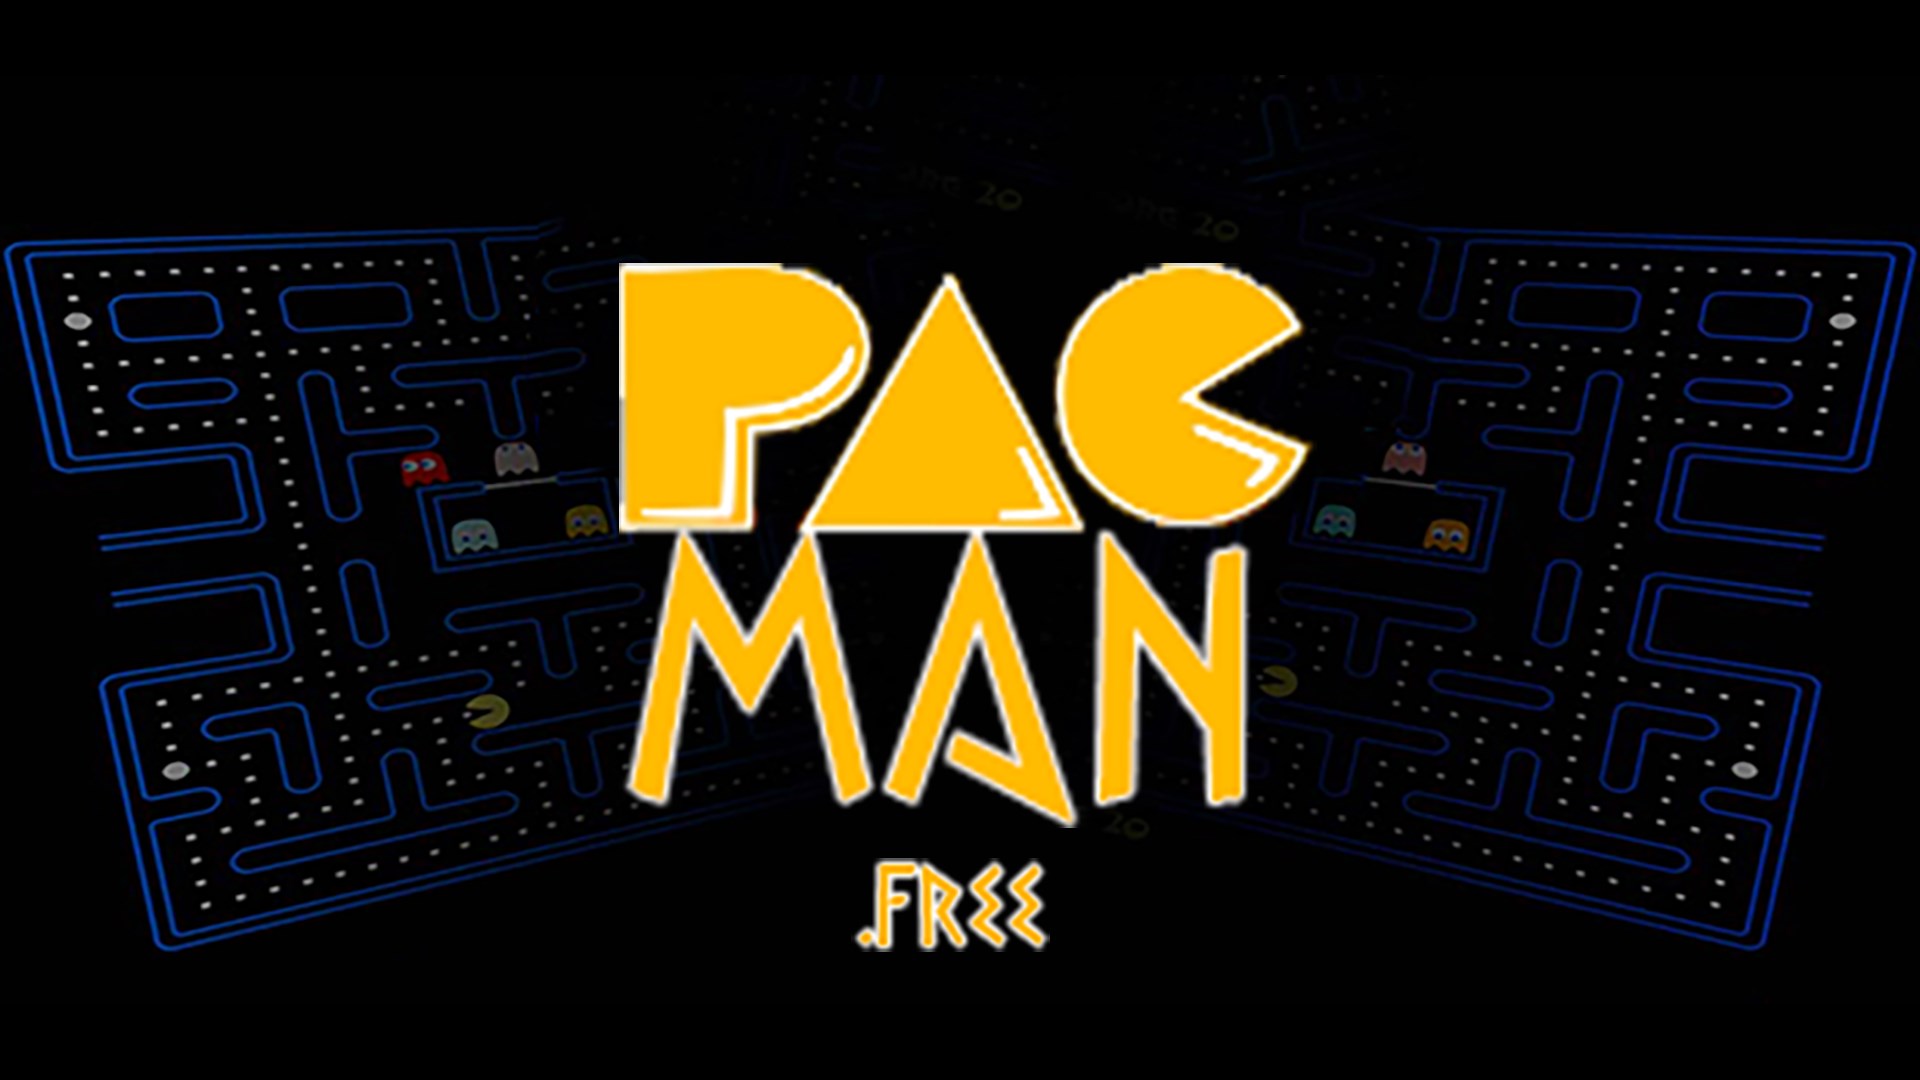 free pacman games for kids